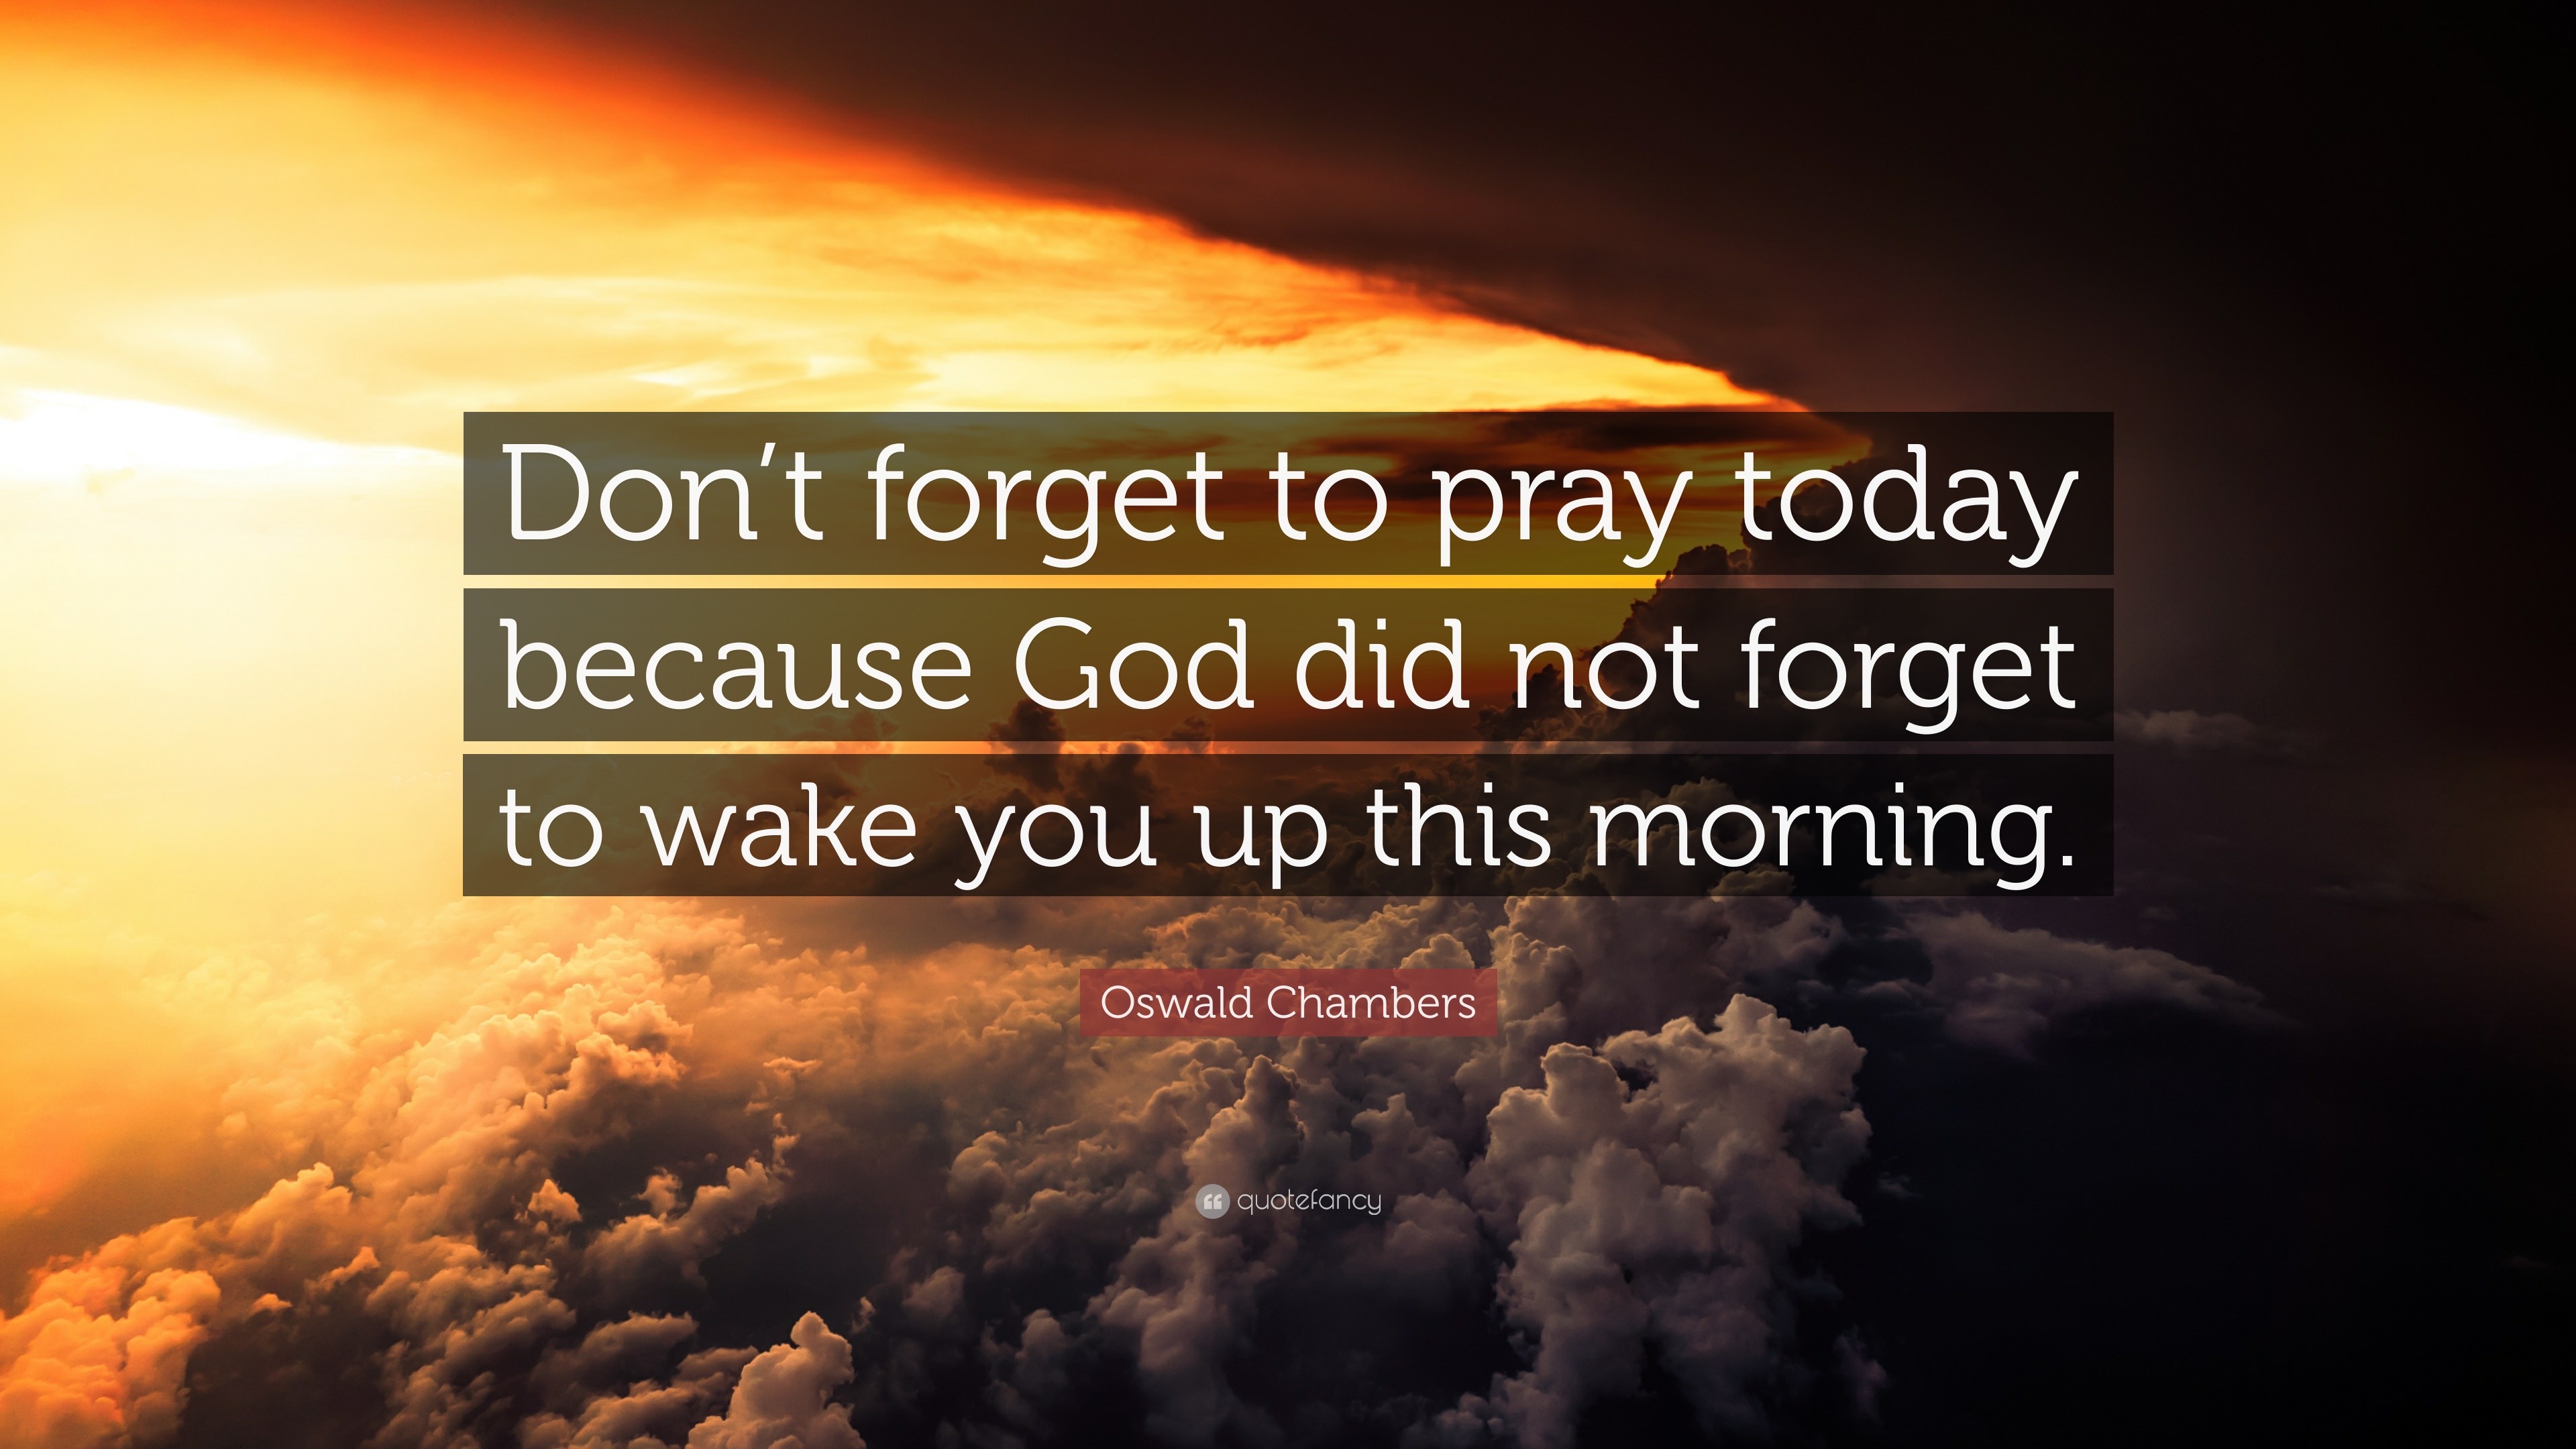 oswald-chambers-quote-don-t-forget-to-pray-today-because-god-did-not